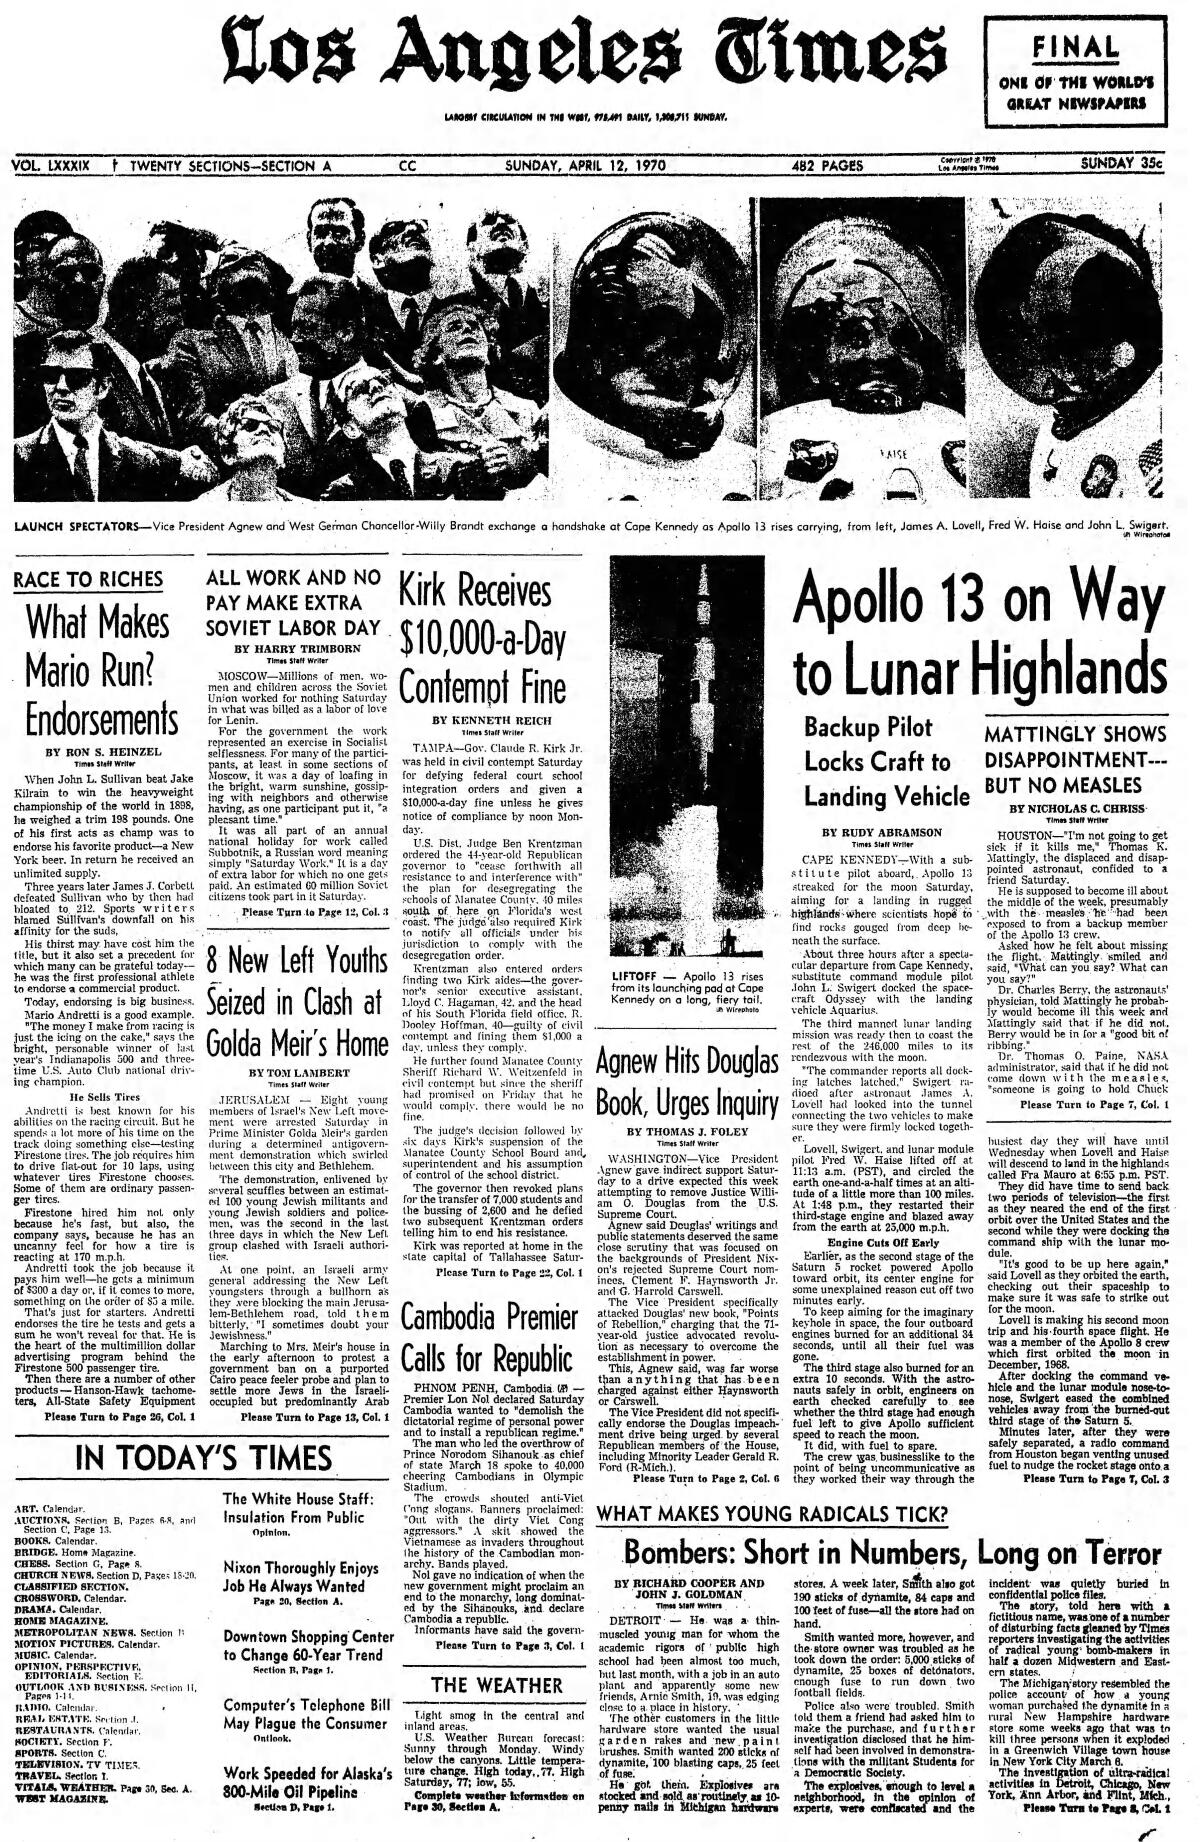 The front page of the Los Angeles Times depicting Apollo 13's launch